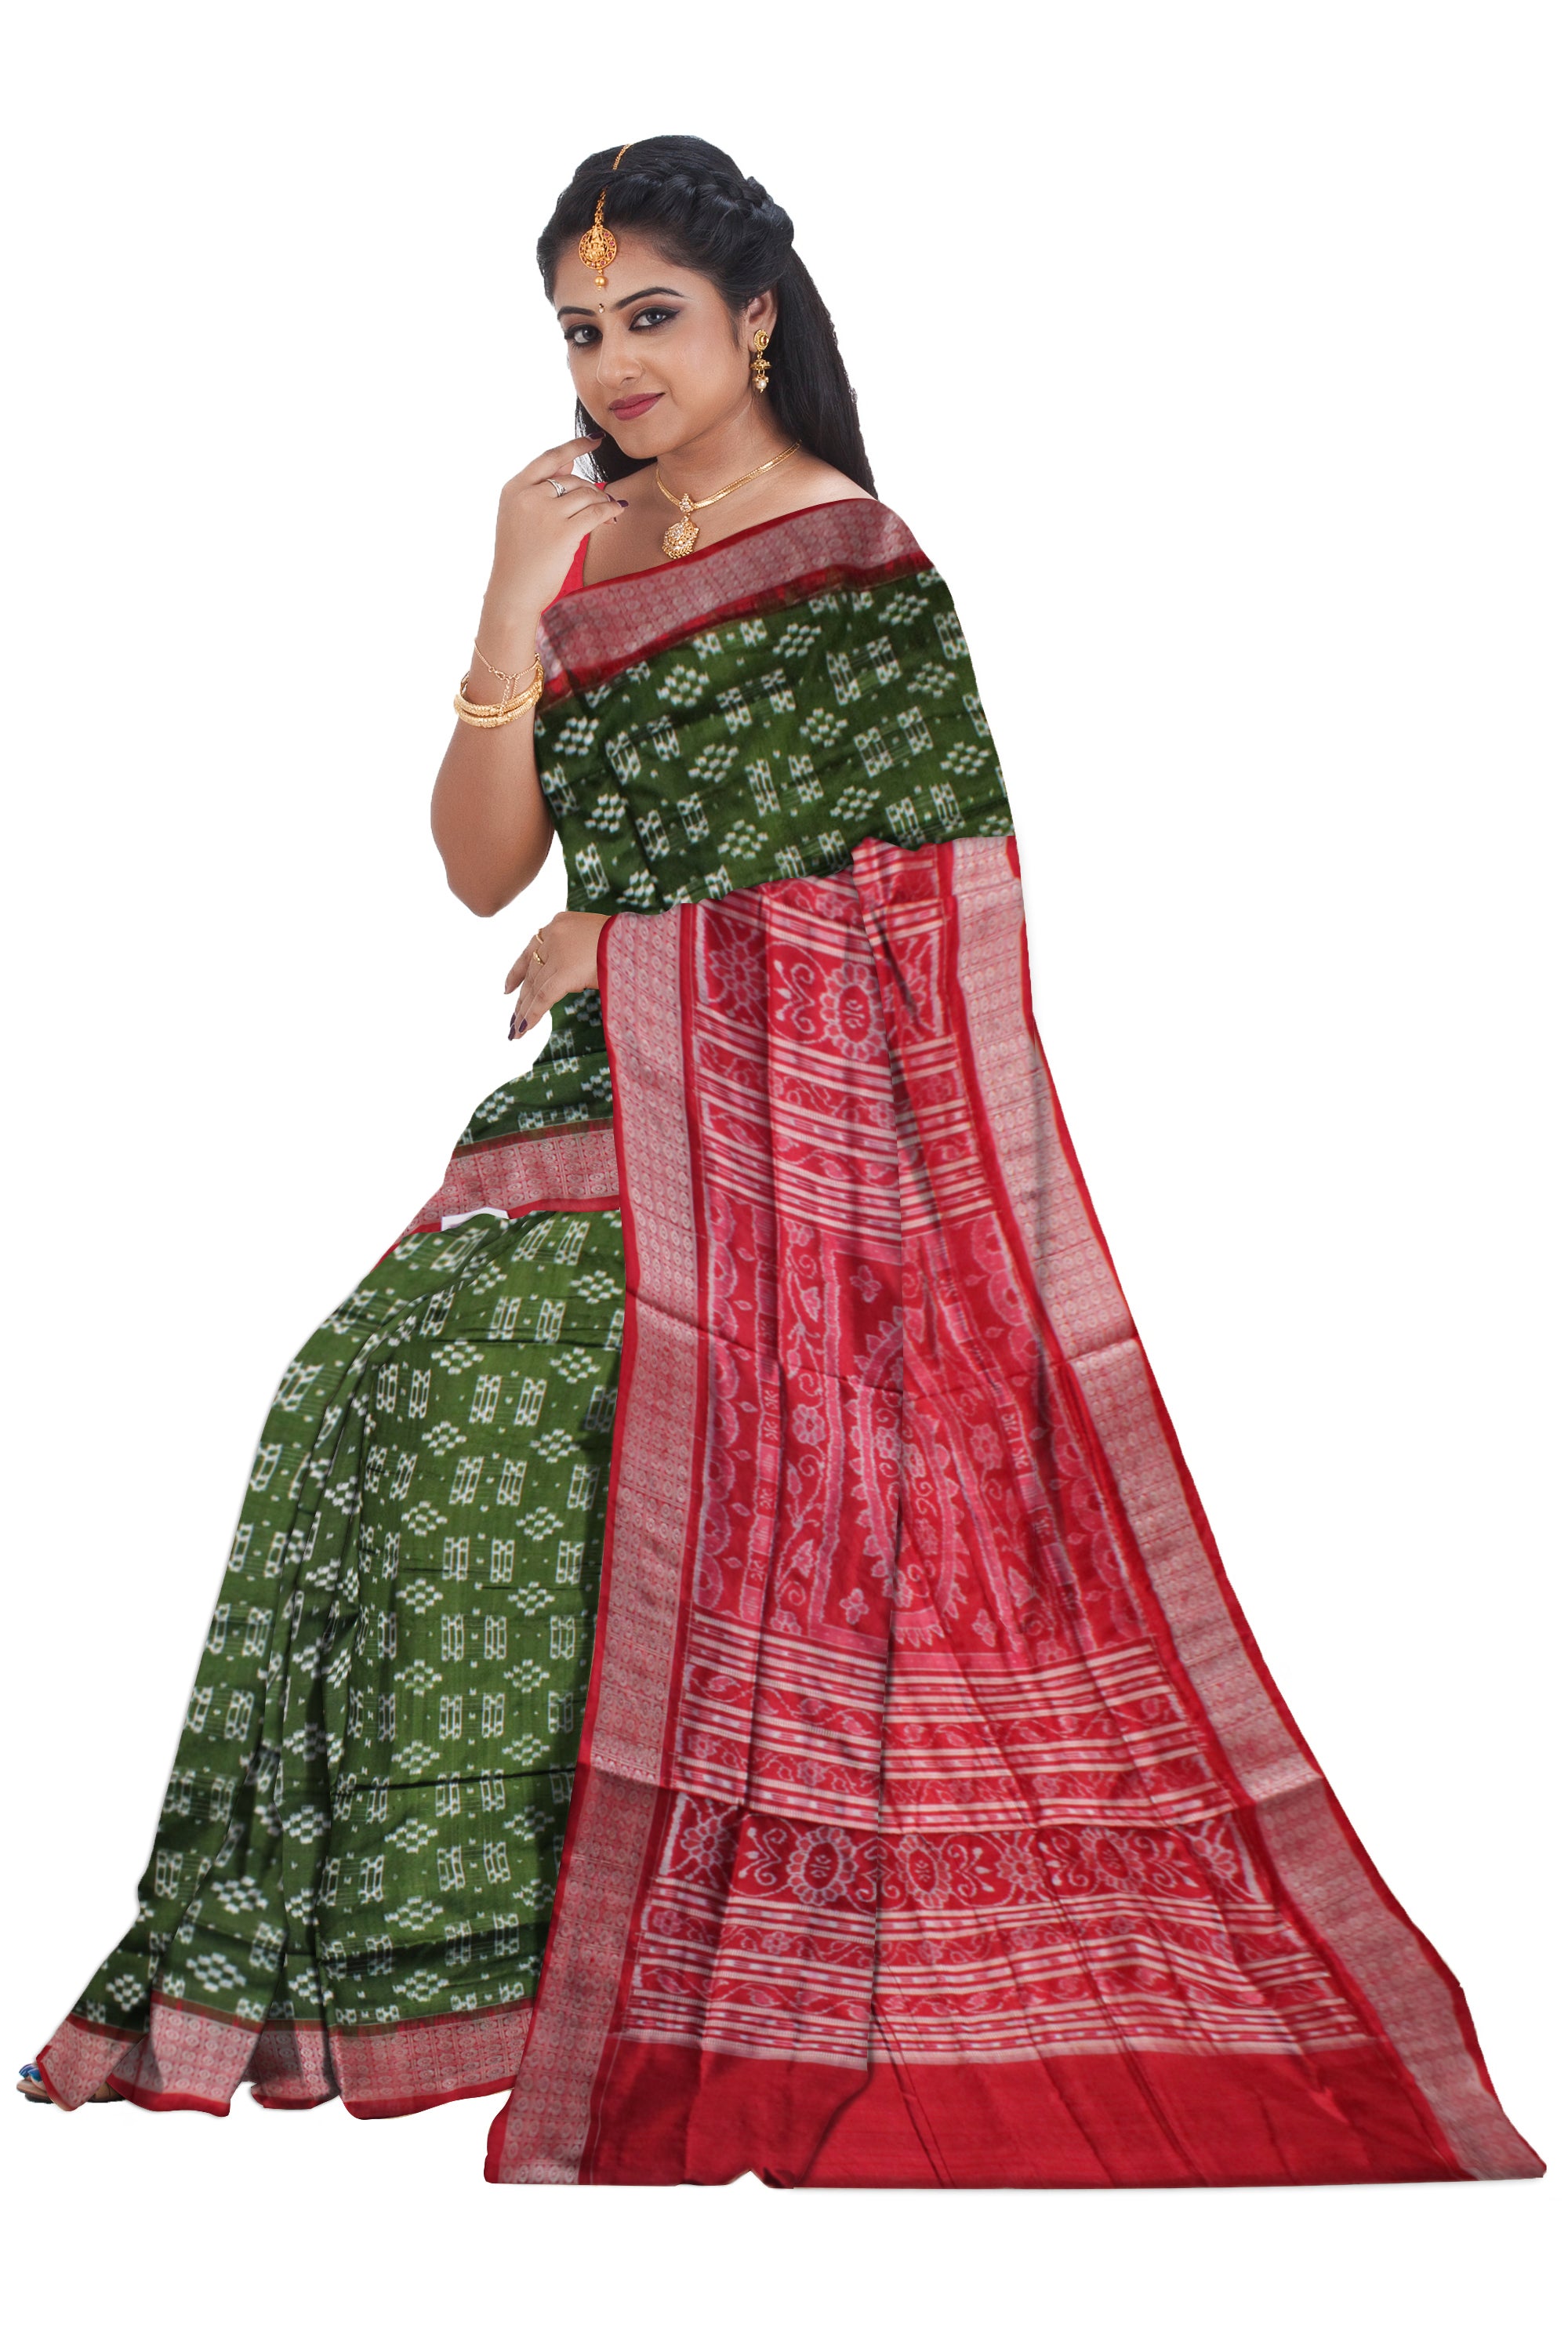 LIGHT GREEN AND RED COLOR PURE SILK SAREE, WITH MATCHING BLOUSE PIECE. - Koshali Arts & Crafts Enterprise